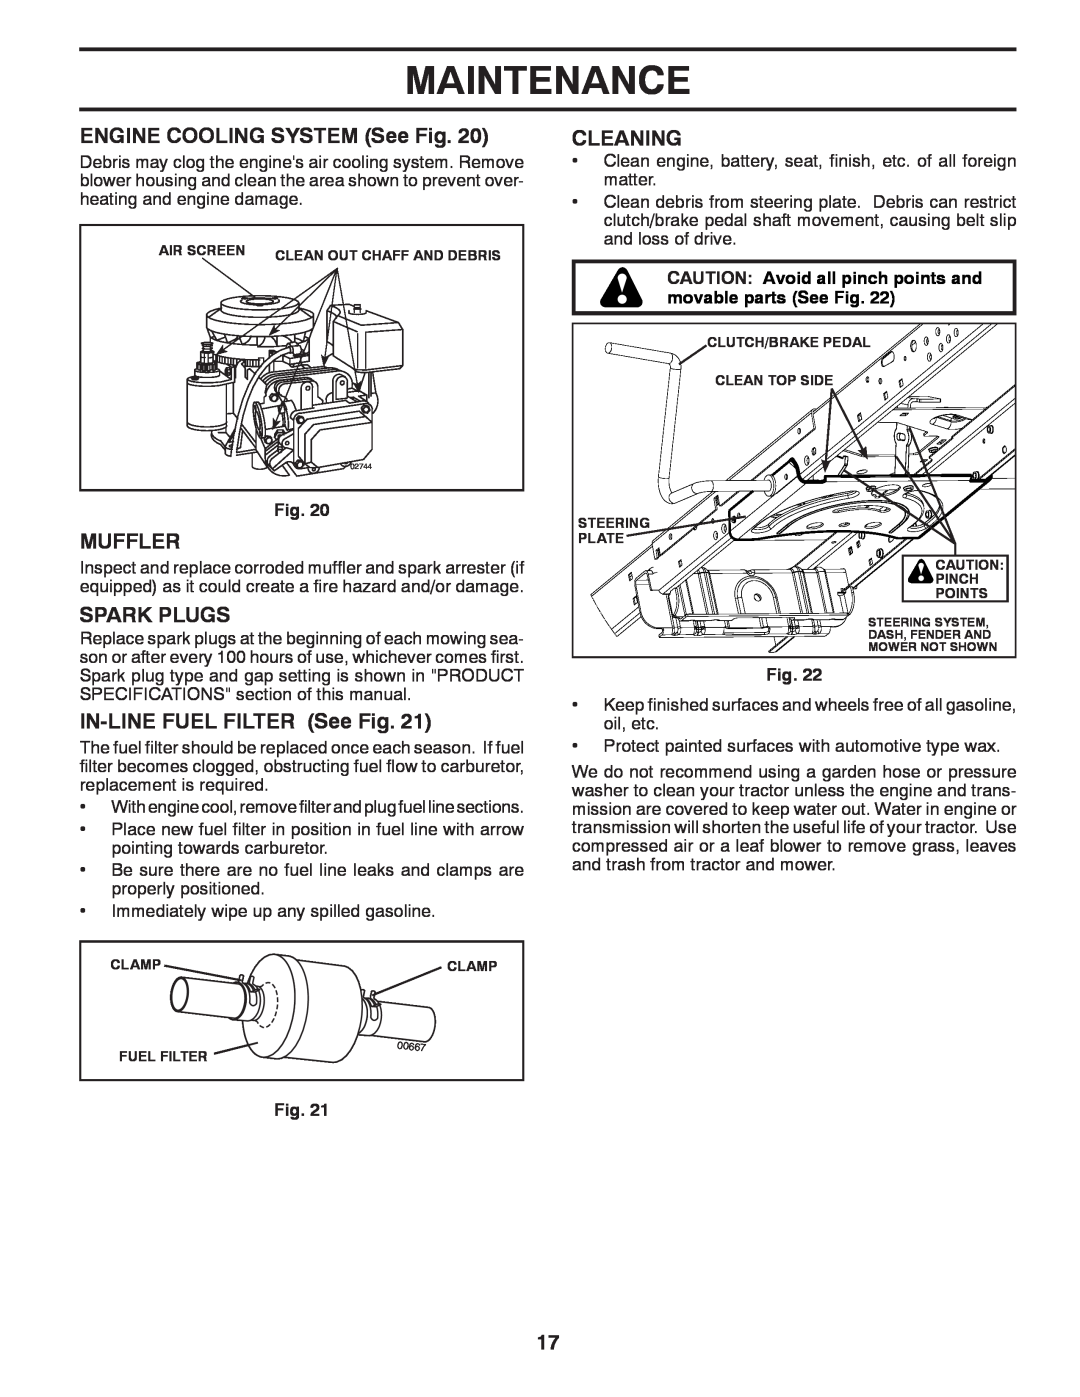 Poulan 96042007202 Maintenance, ENGINE COOLING SYSTEM See Fig, Muffler, Spark Plugs, IN-LINEFUEL FILTER See Fig, Cleaning 